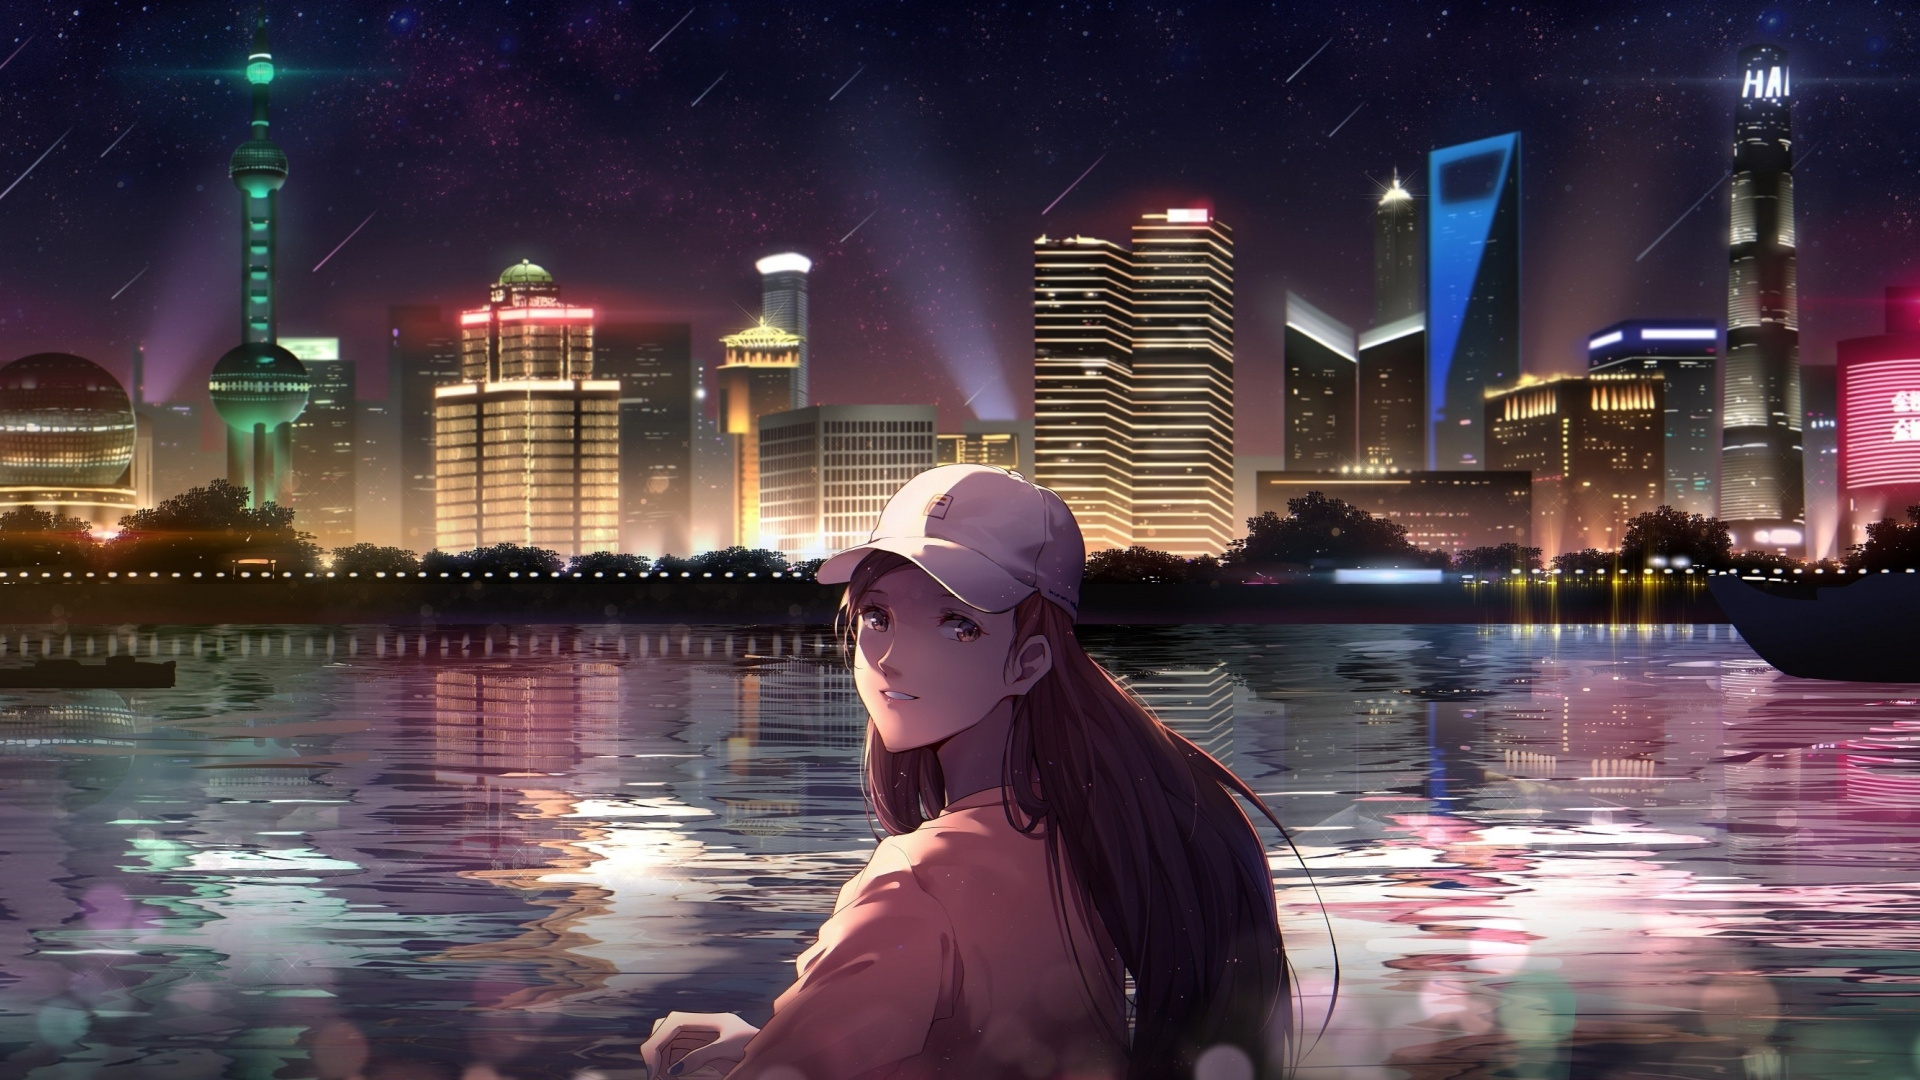 Download 1920x1080 wallpaper night  out city  anime  girl 